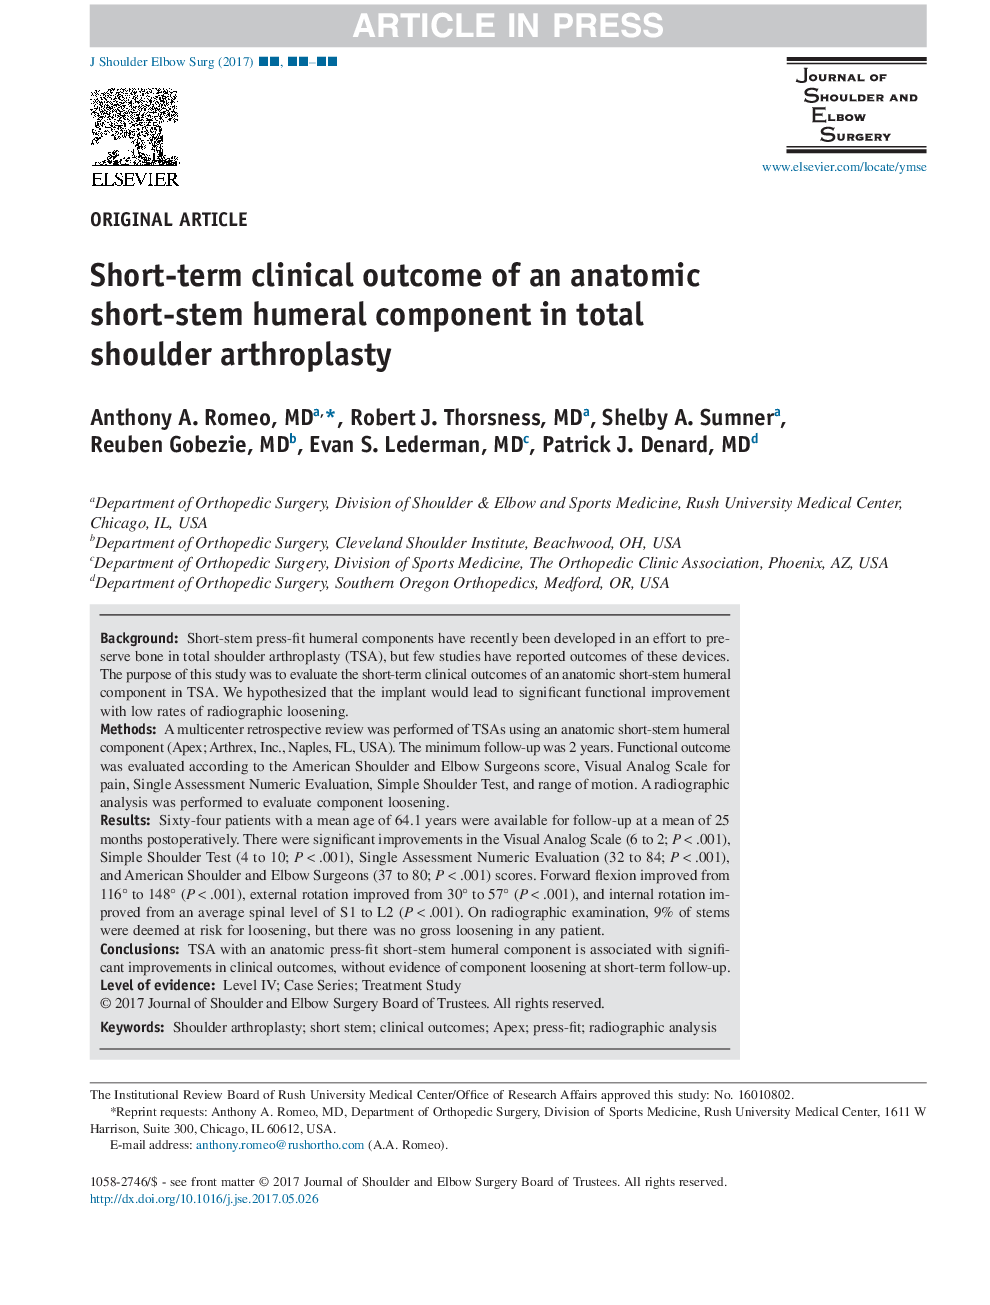 Short-term clinical outcome of an anatomic short-stem humeral component in total shoulder arthroplasty